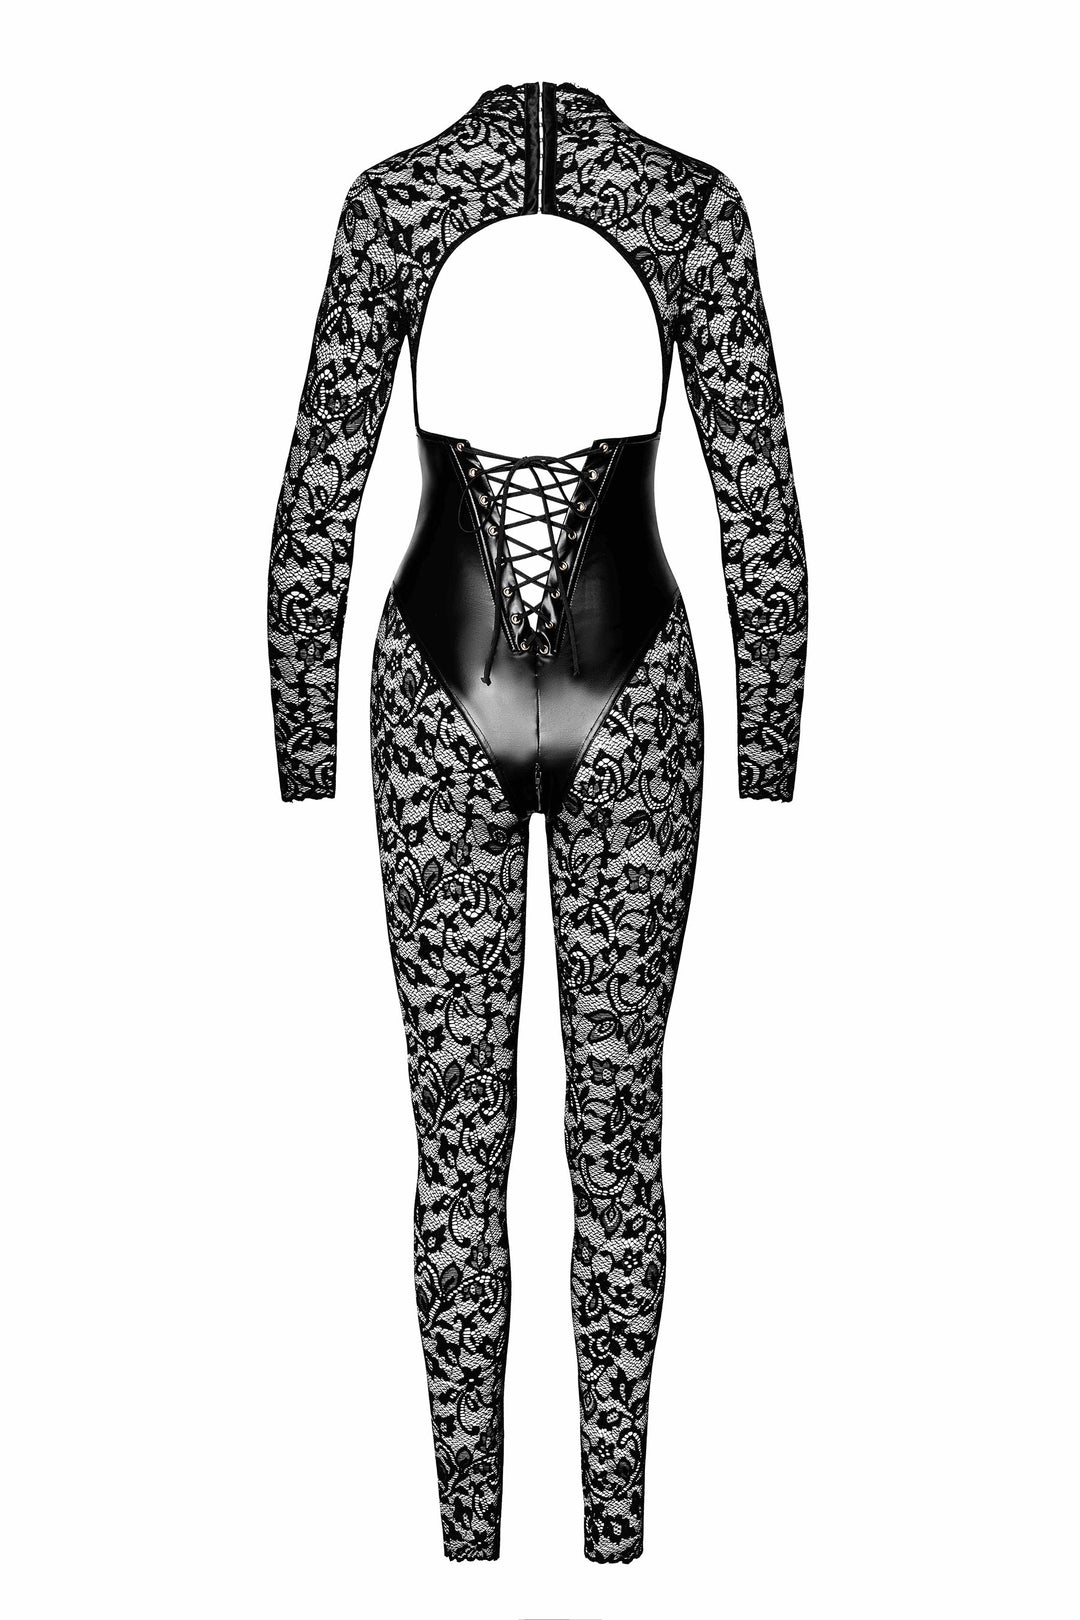 Enigma Lace Catsuit With Under Bust Bodice